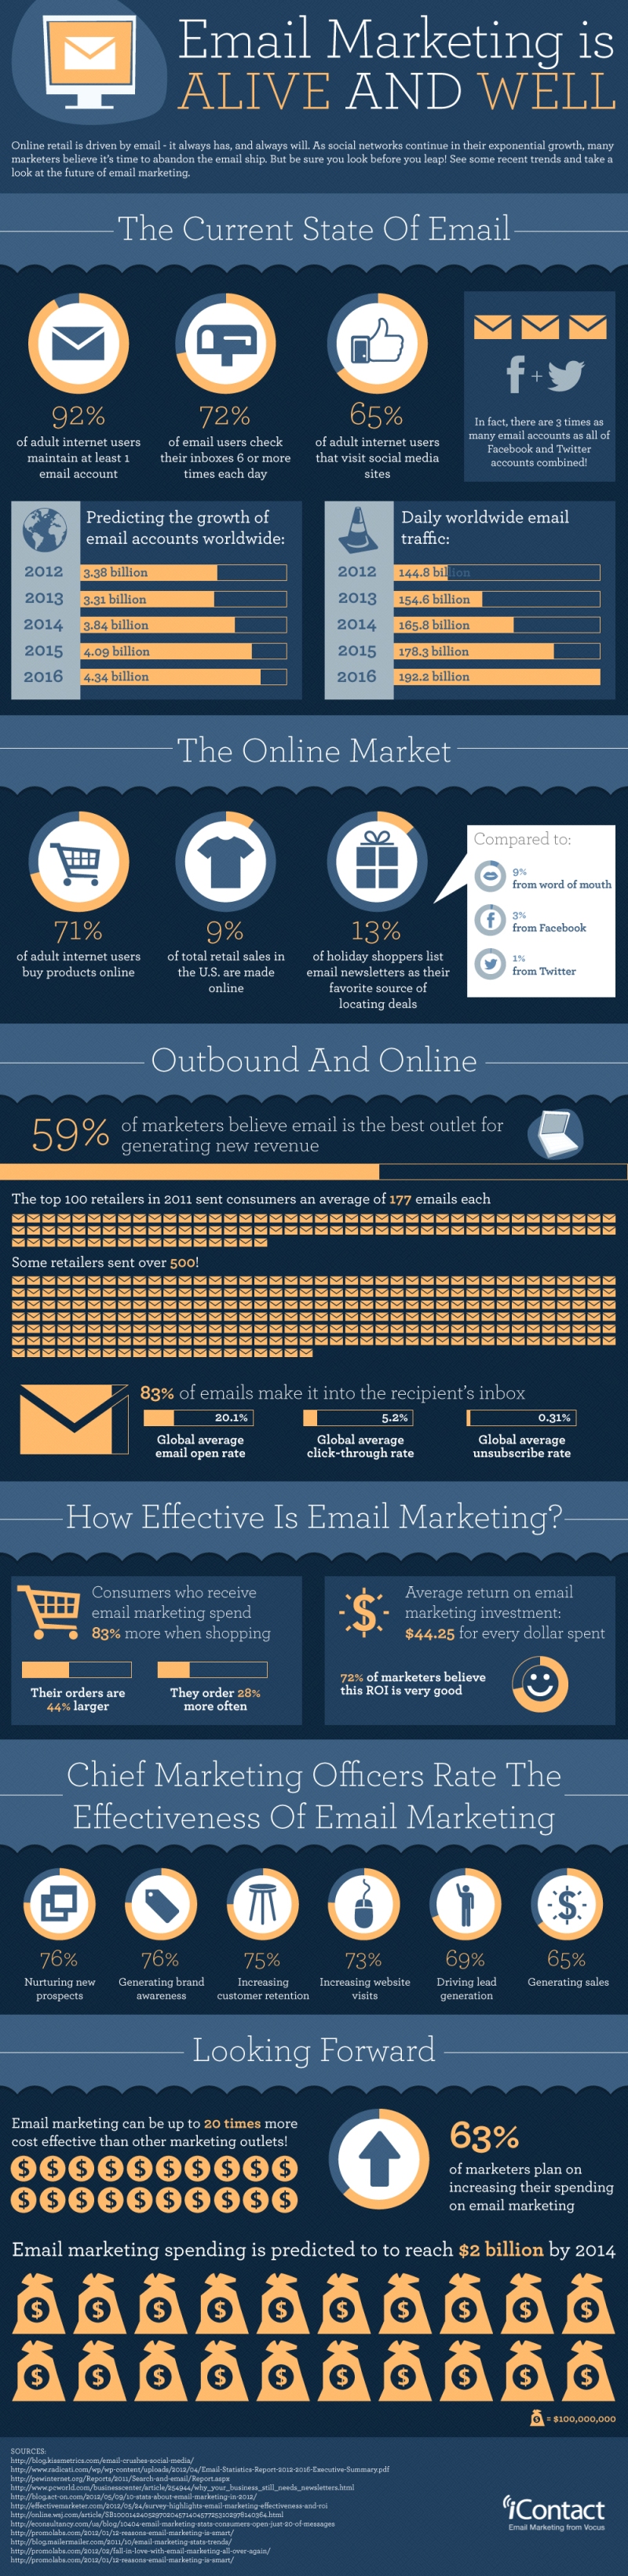  Why use email marketing